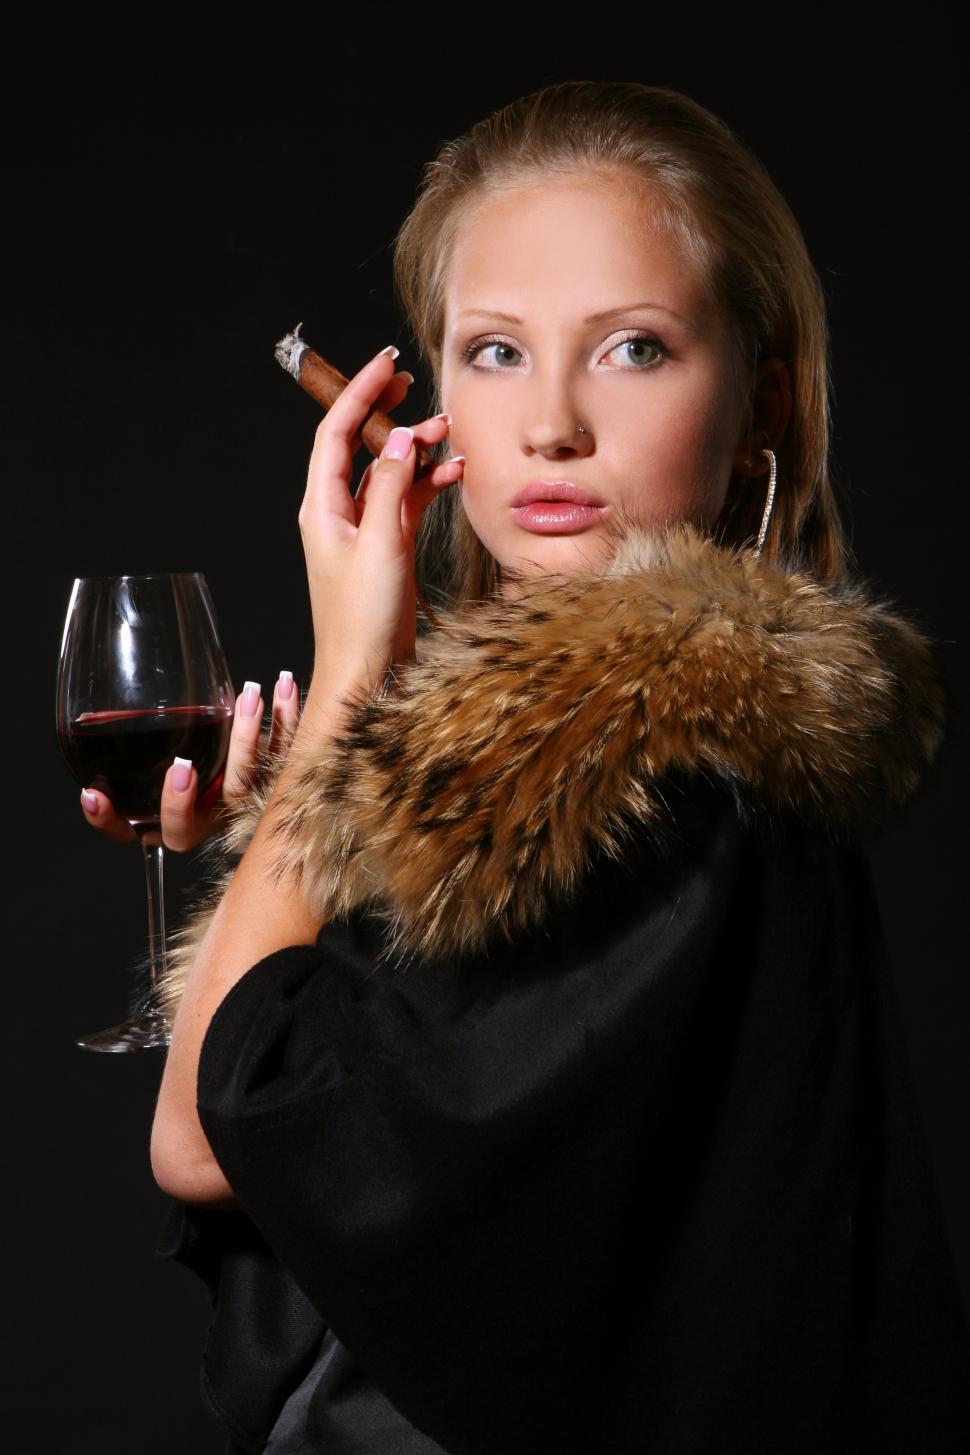 Free Image of elegant woman with wine and cigar 